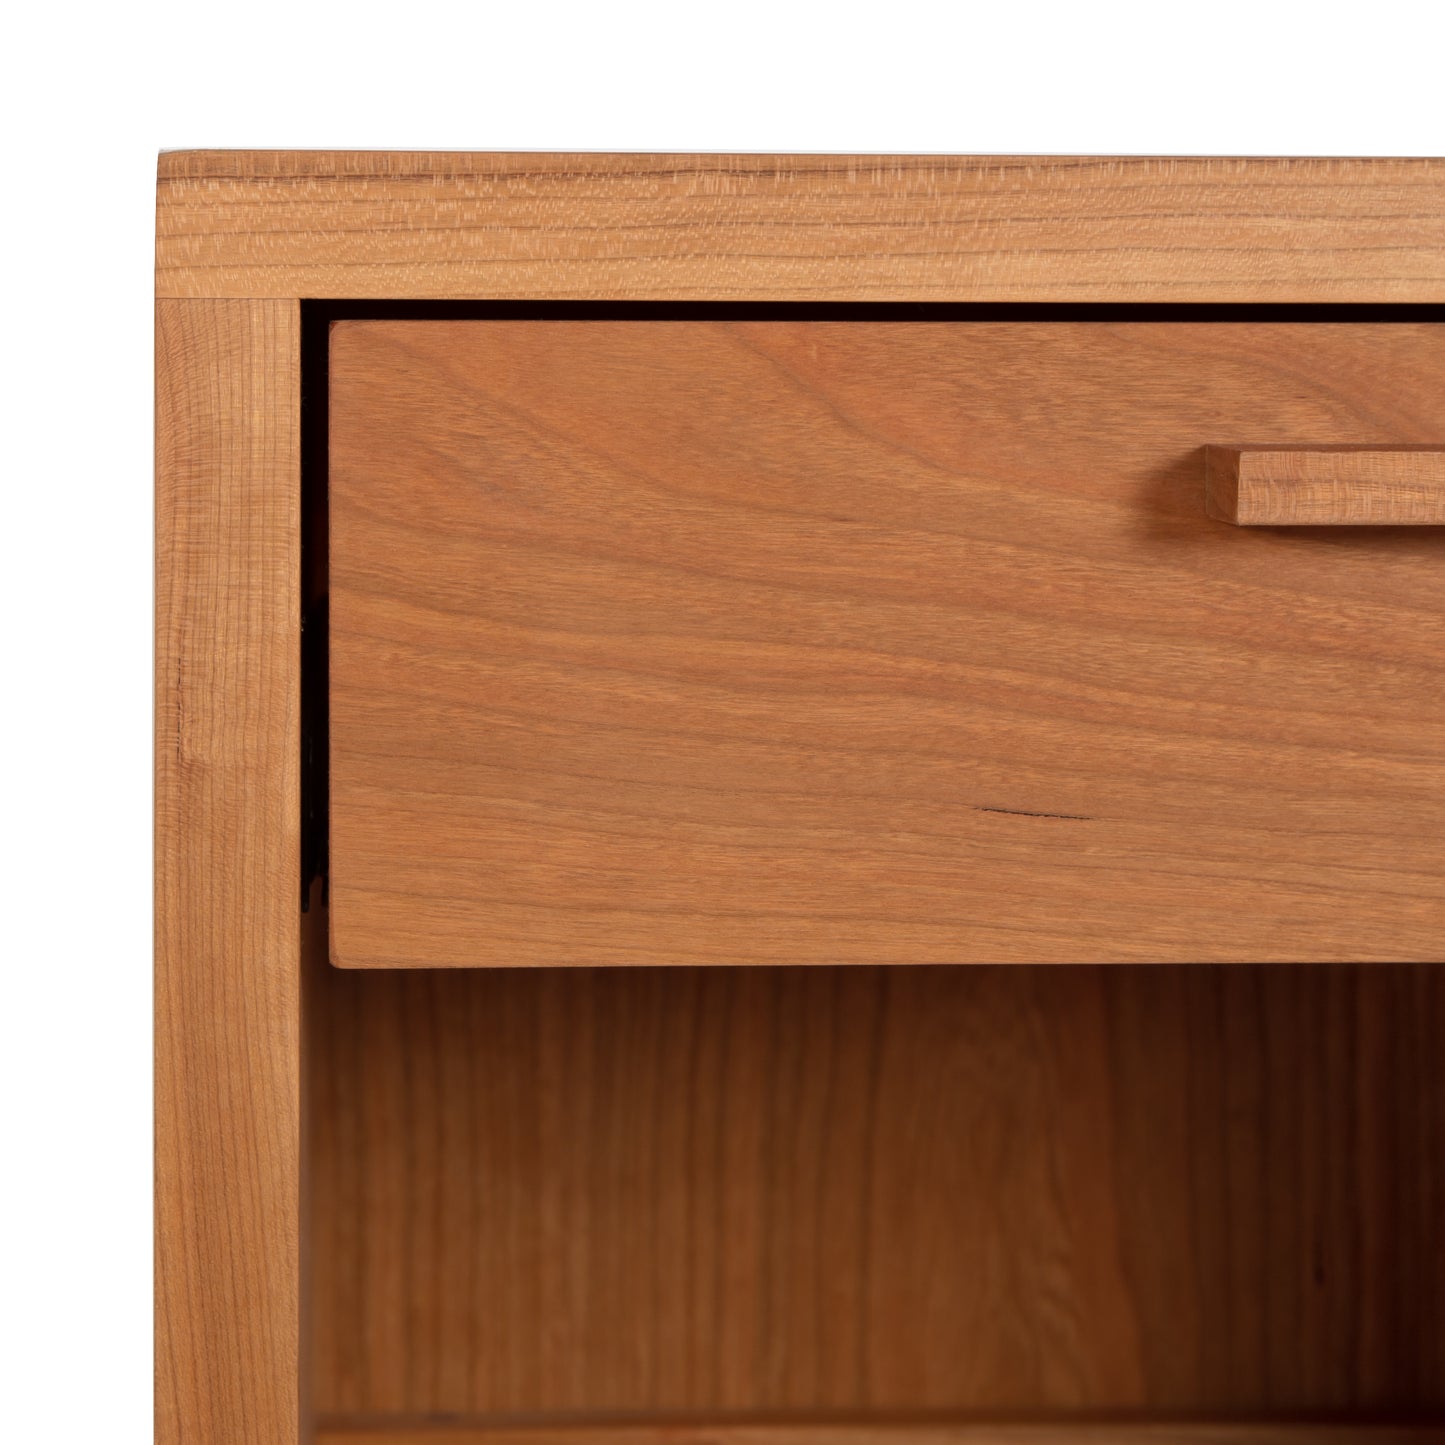 A close-up of a Vermont Furniture Designs Loft 1-Drawer Enclosed Shelf Nightstand with a single drawer partially open, revealing its solid wood construction.